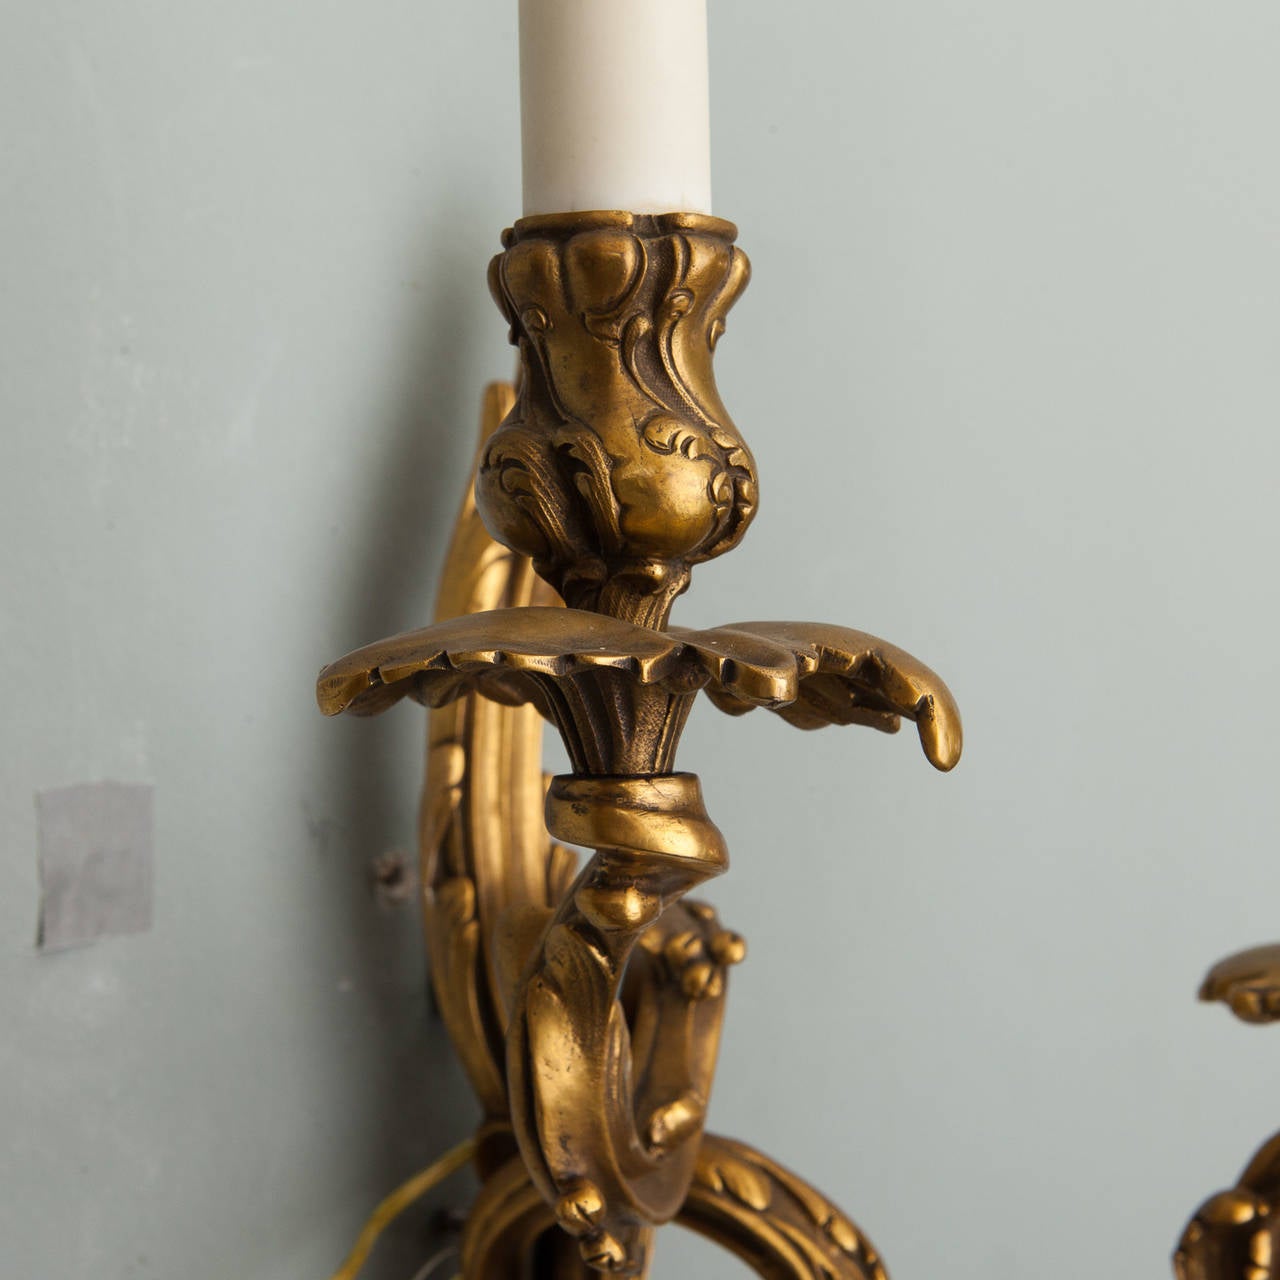 Circa 1900 French Louis XVI style bronze sconces with two candle arms. Sockets are for candelabra bulbs. New electrical wiring for US standards.